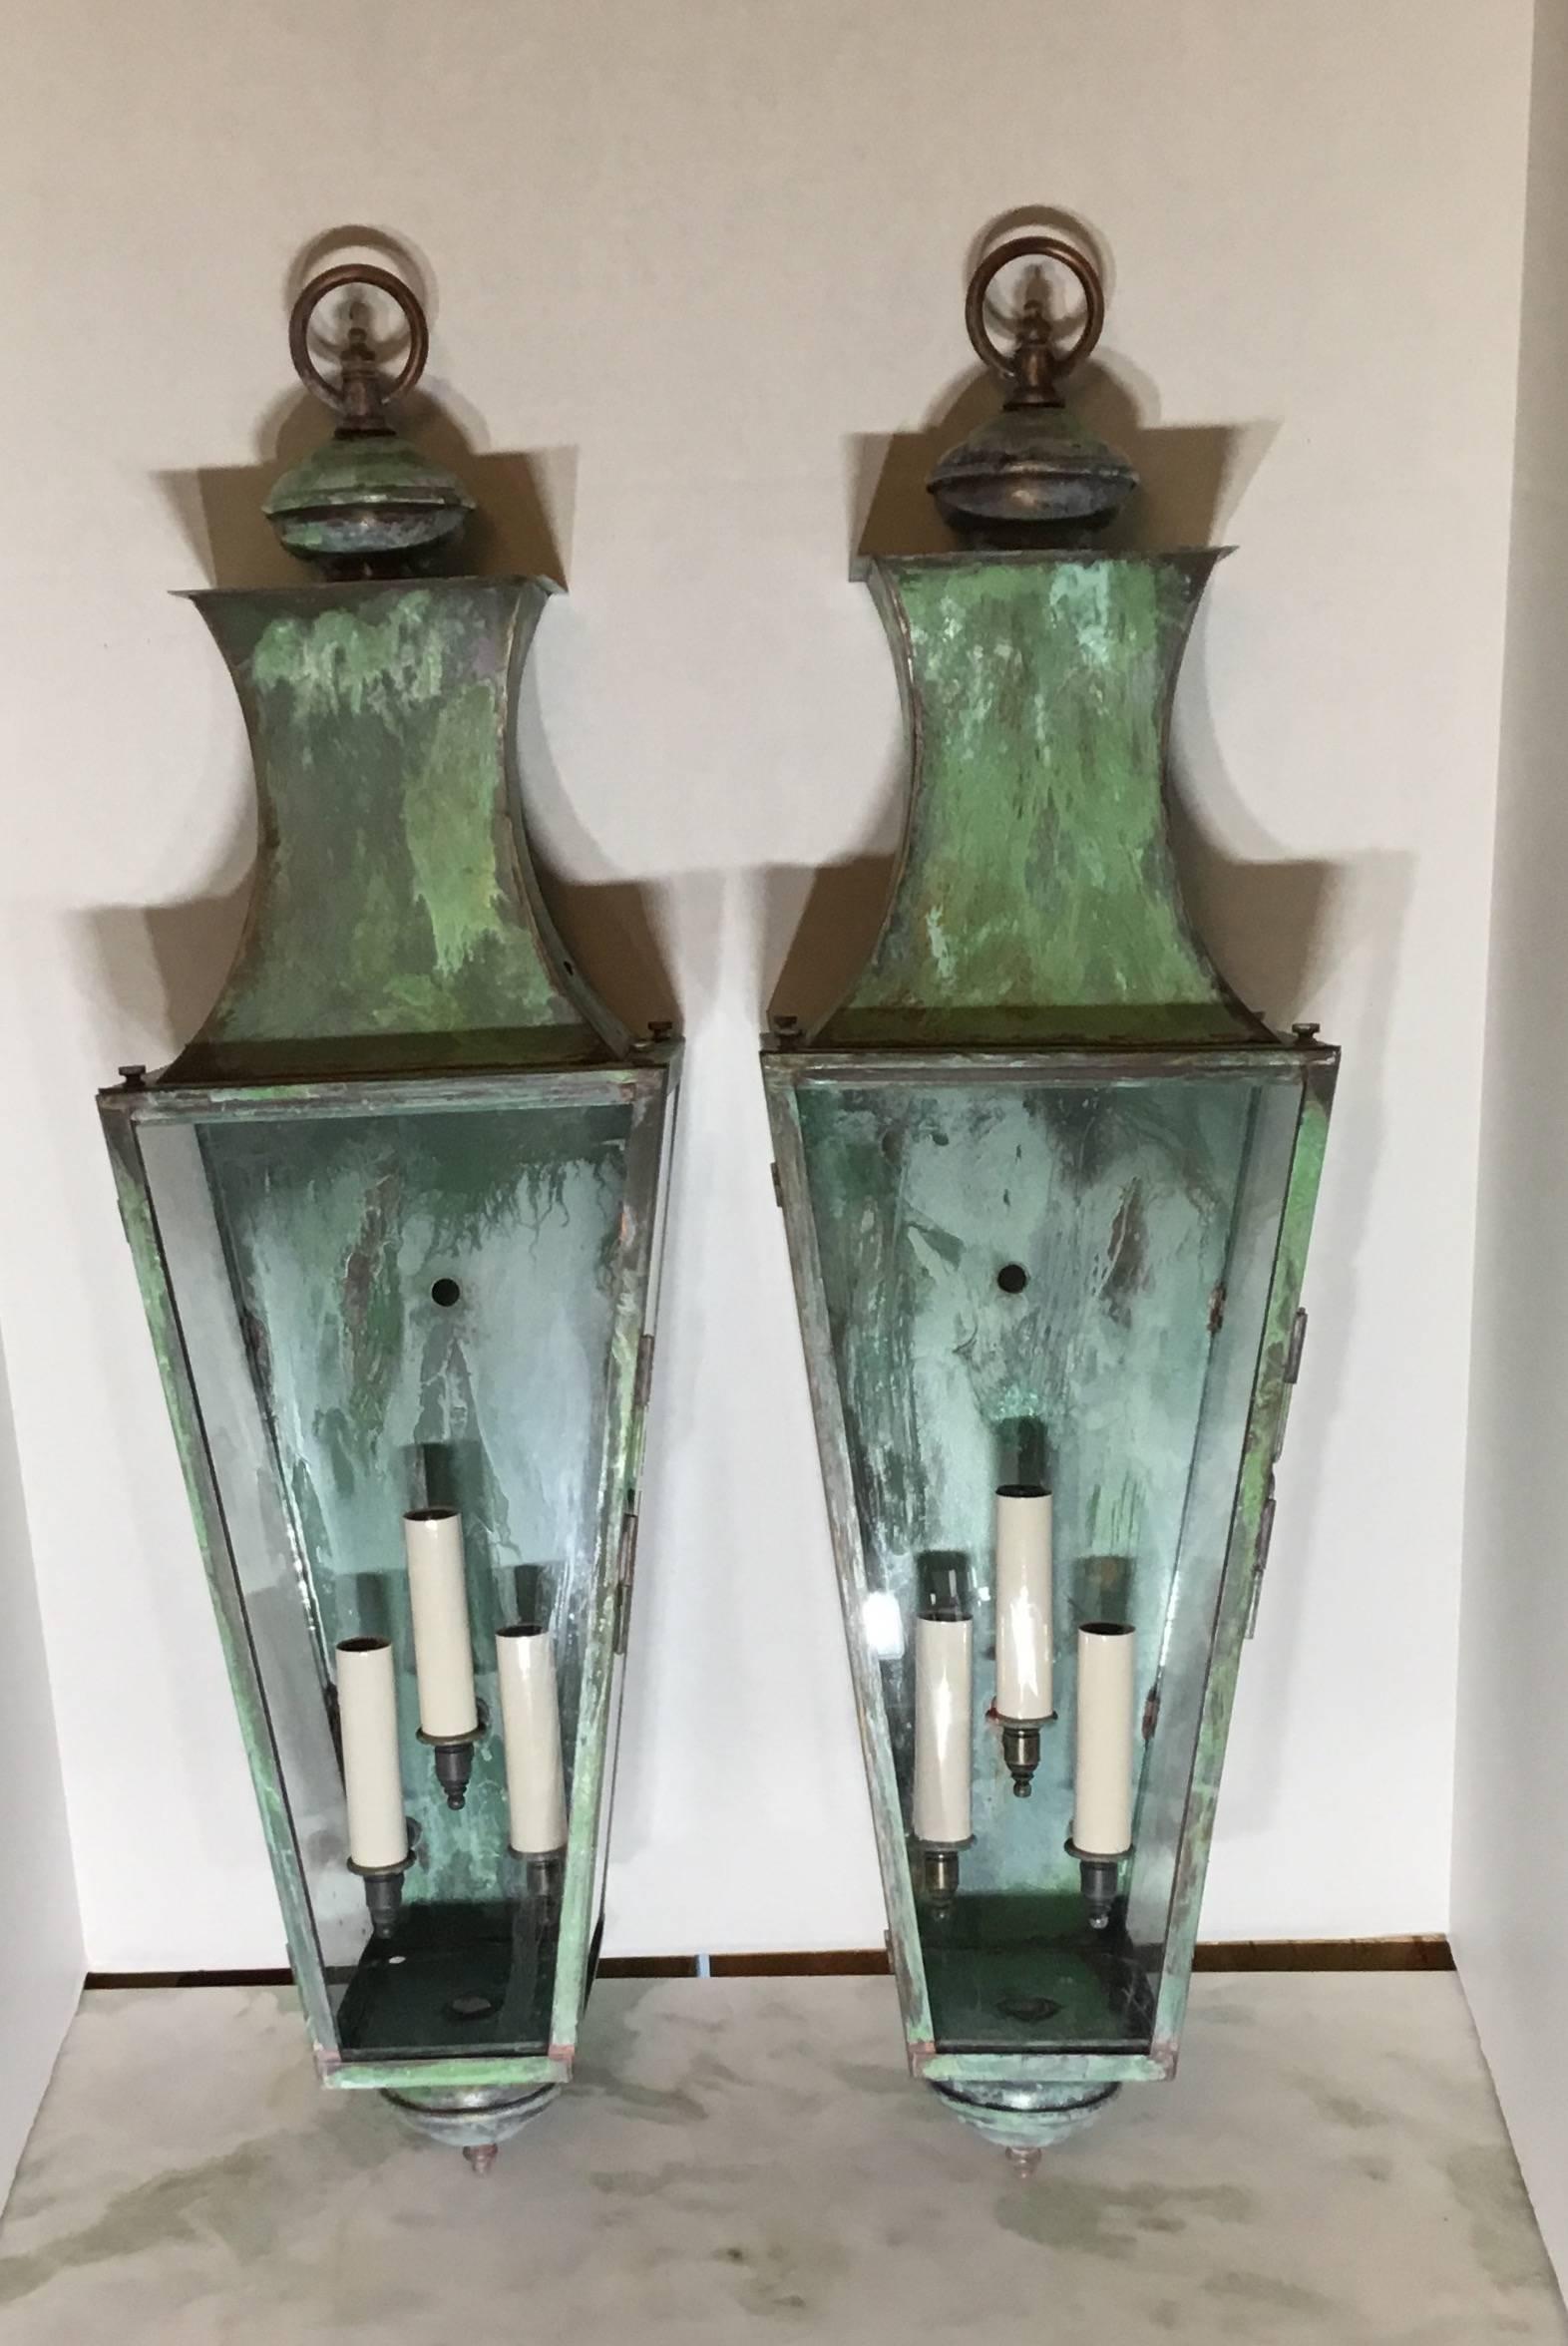 Contemporary Pair of Architectural Copper Wall Lantern